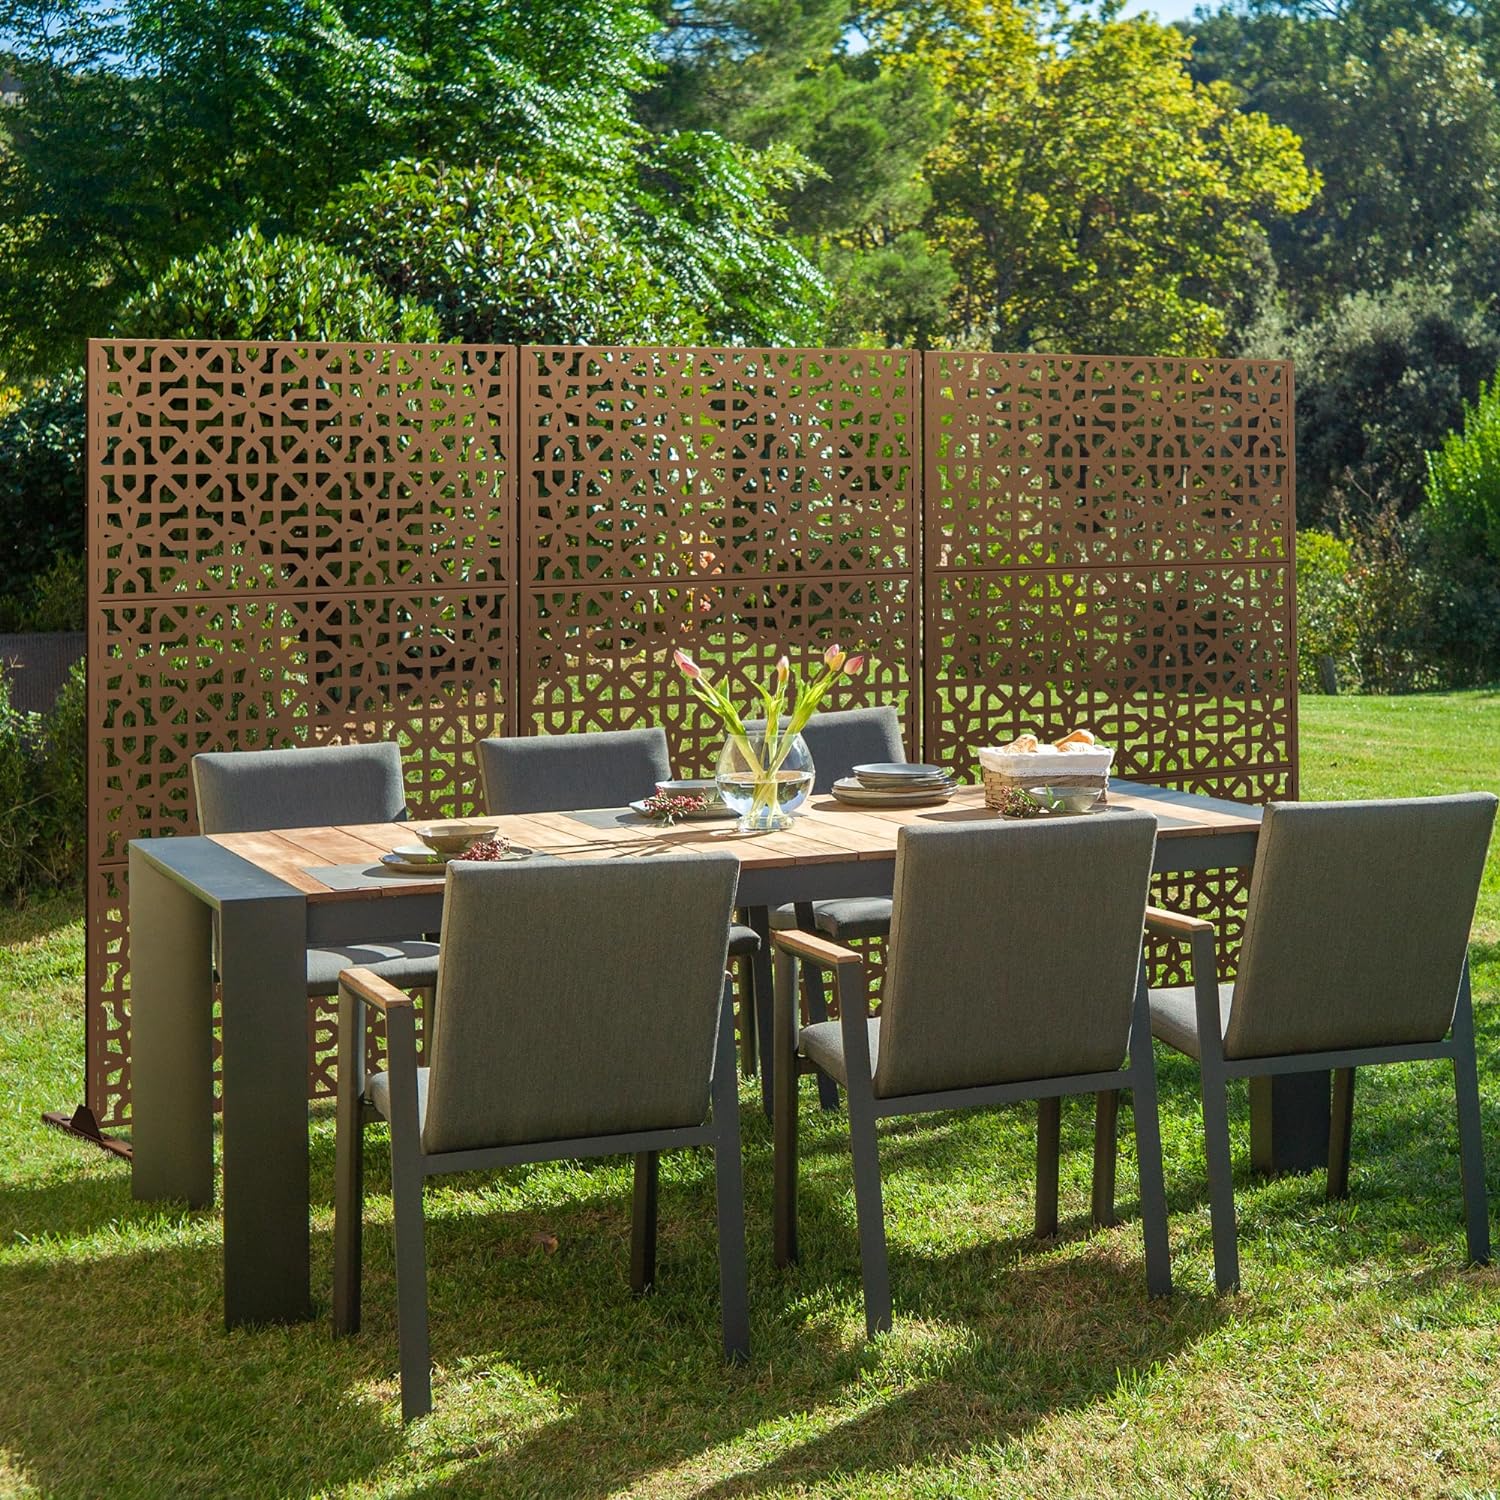 The Latest Metal Privacy Screens Are Designed for Decks, Courtyards and More